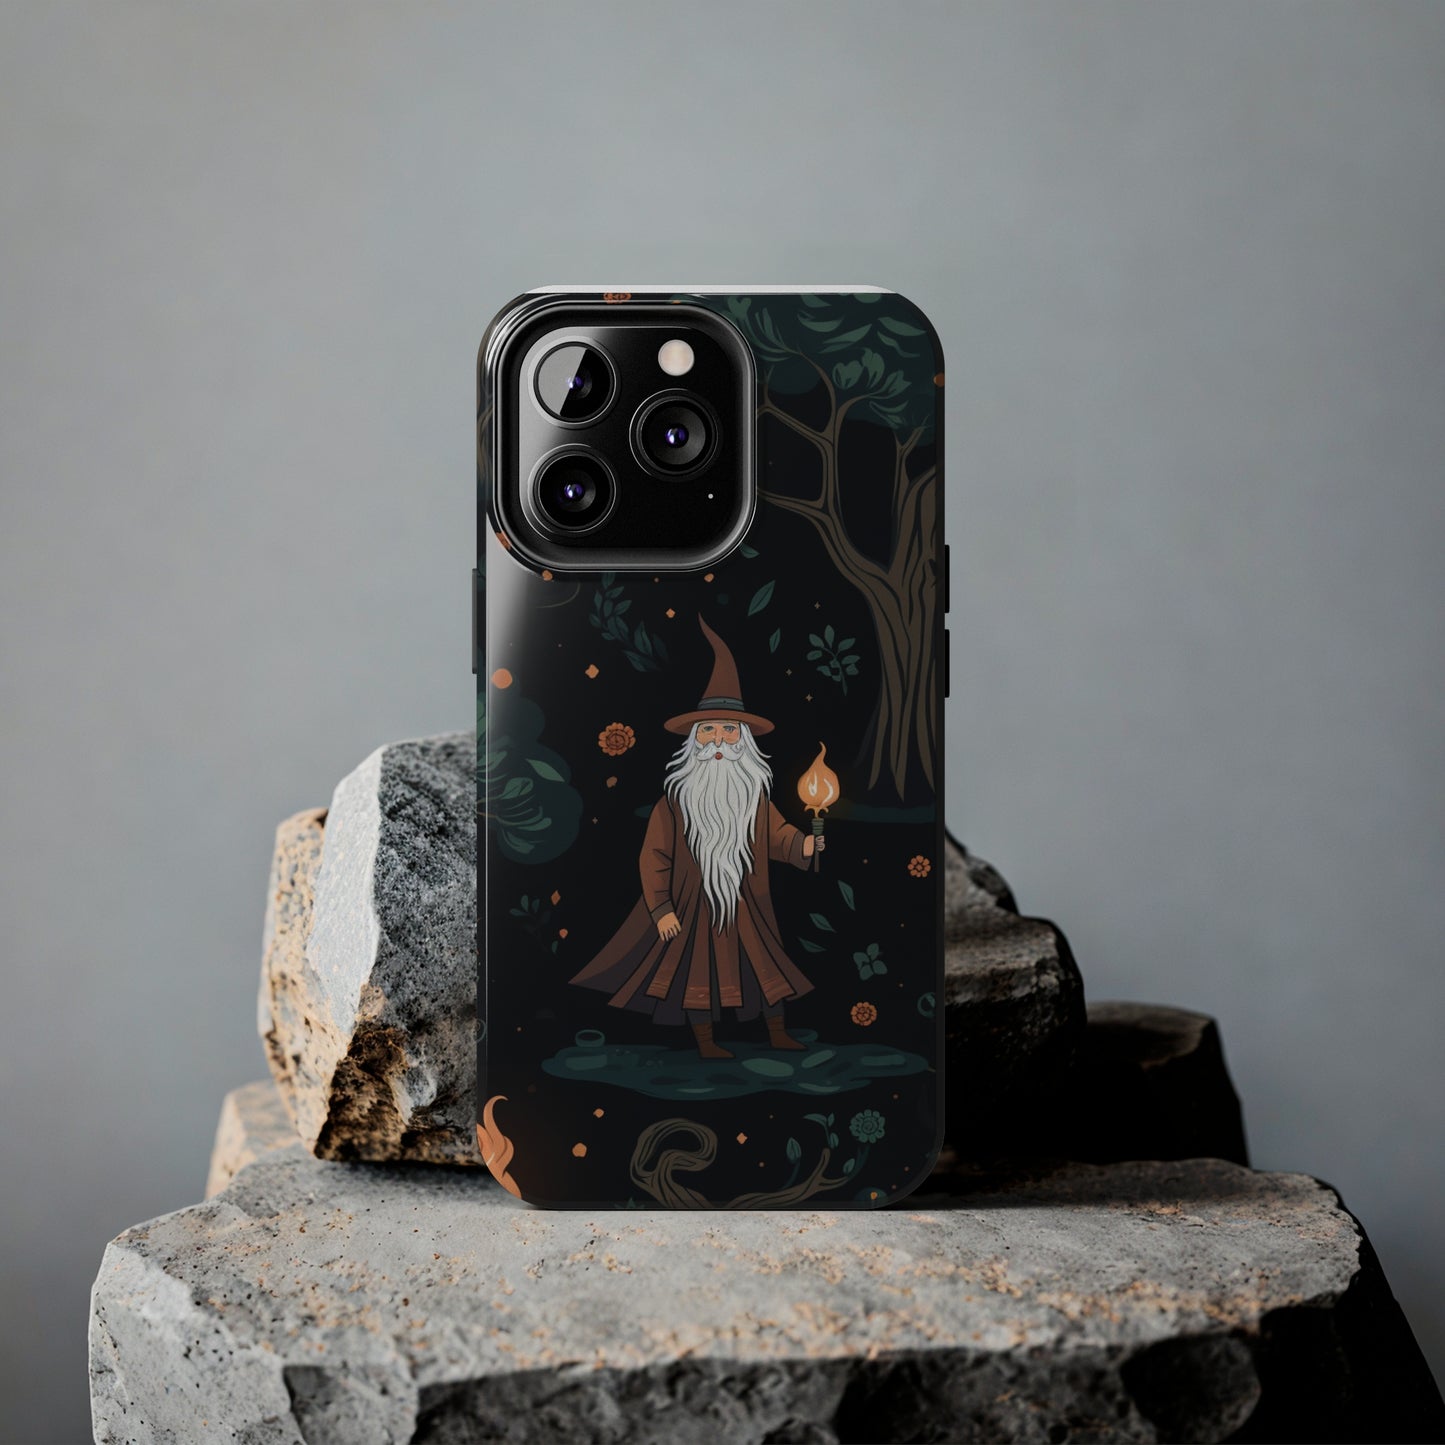 Wizard in the Dark Forest Tough iPhone Cases | Impact-Resistance, Anti-Shock Phone Case and Accessory | Premium Spiritual Design